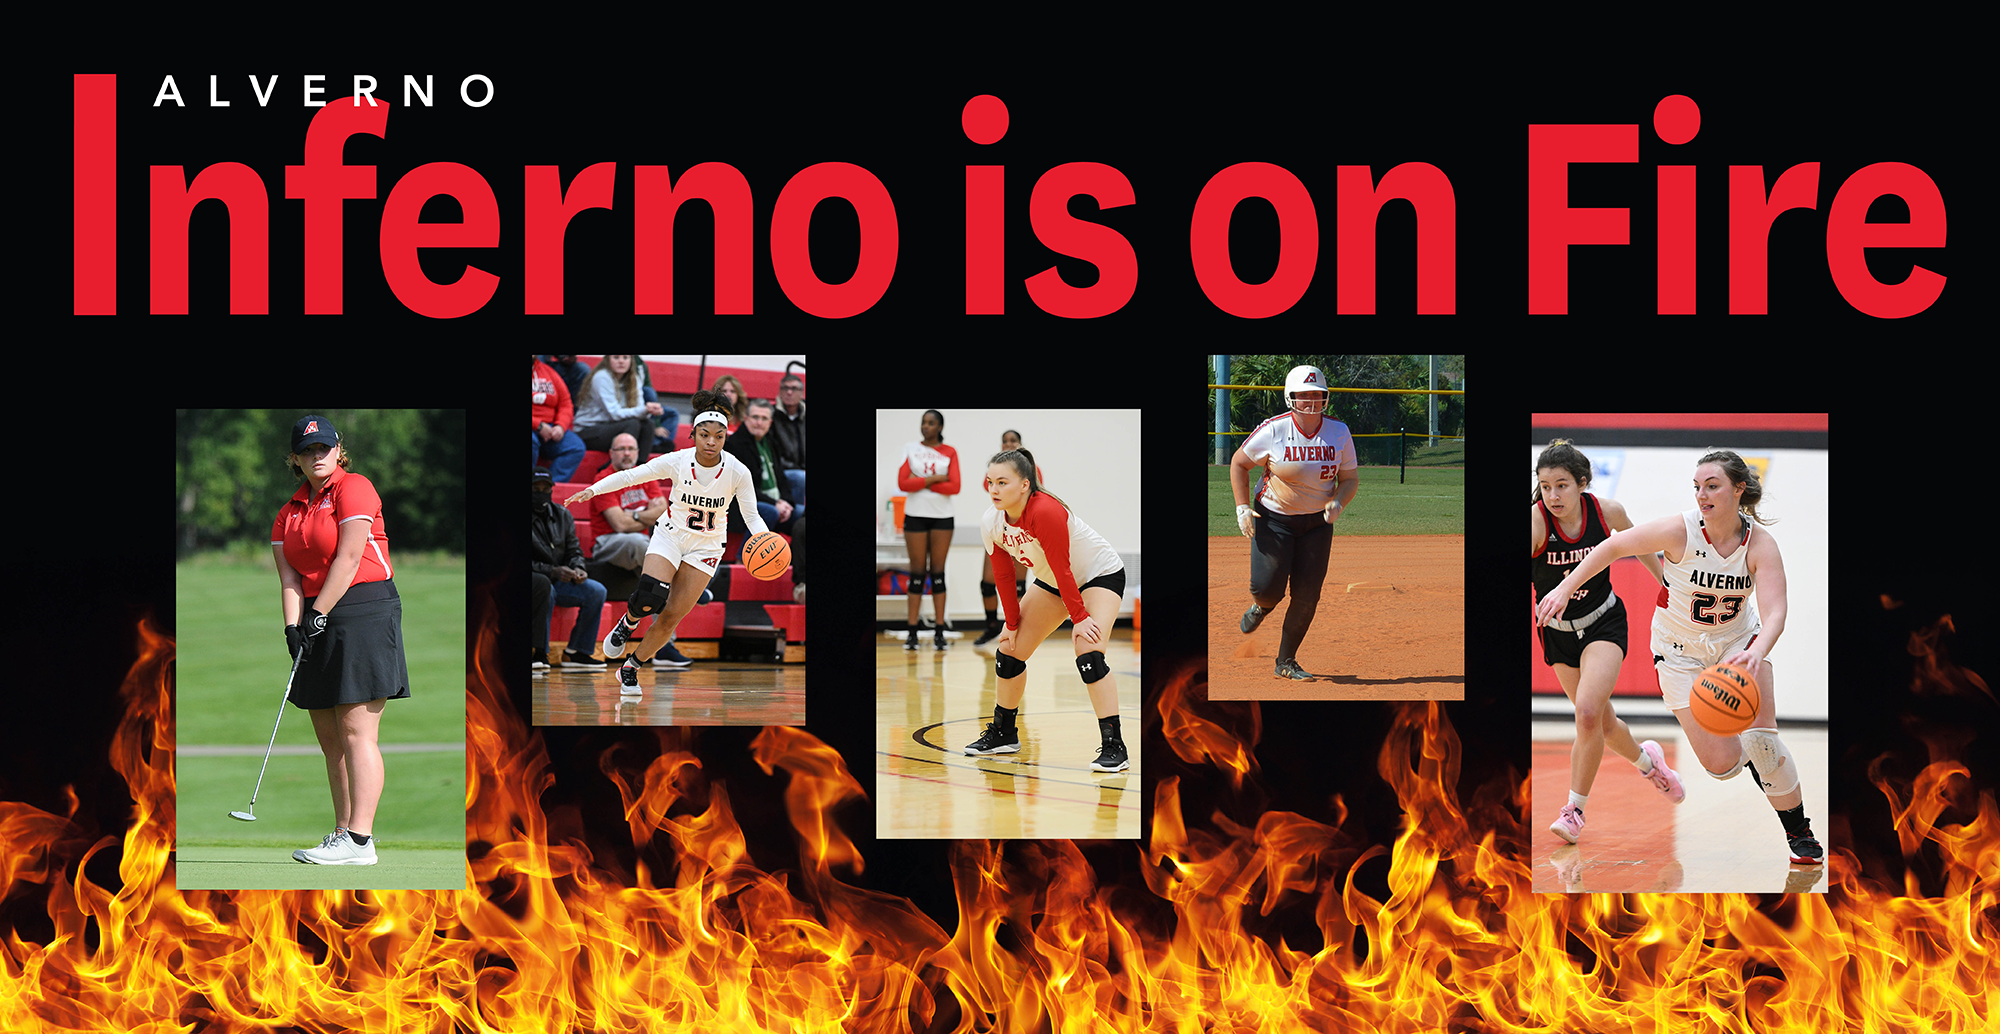 Alverno Inferno is on Fire